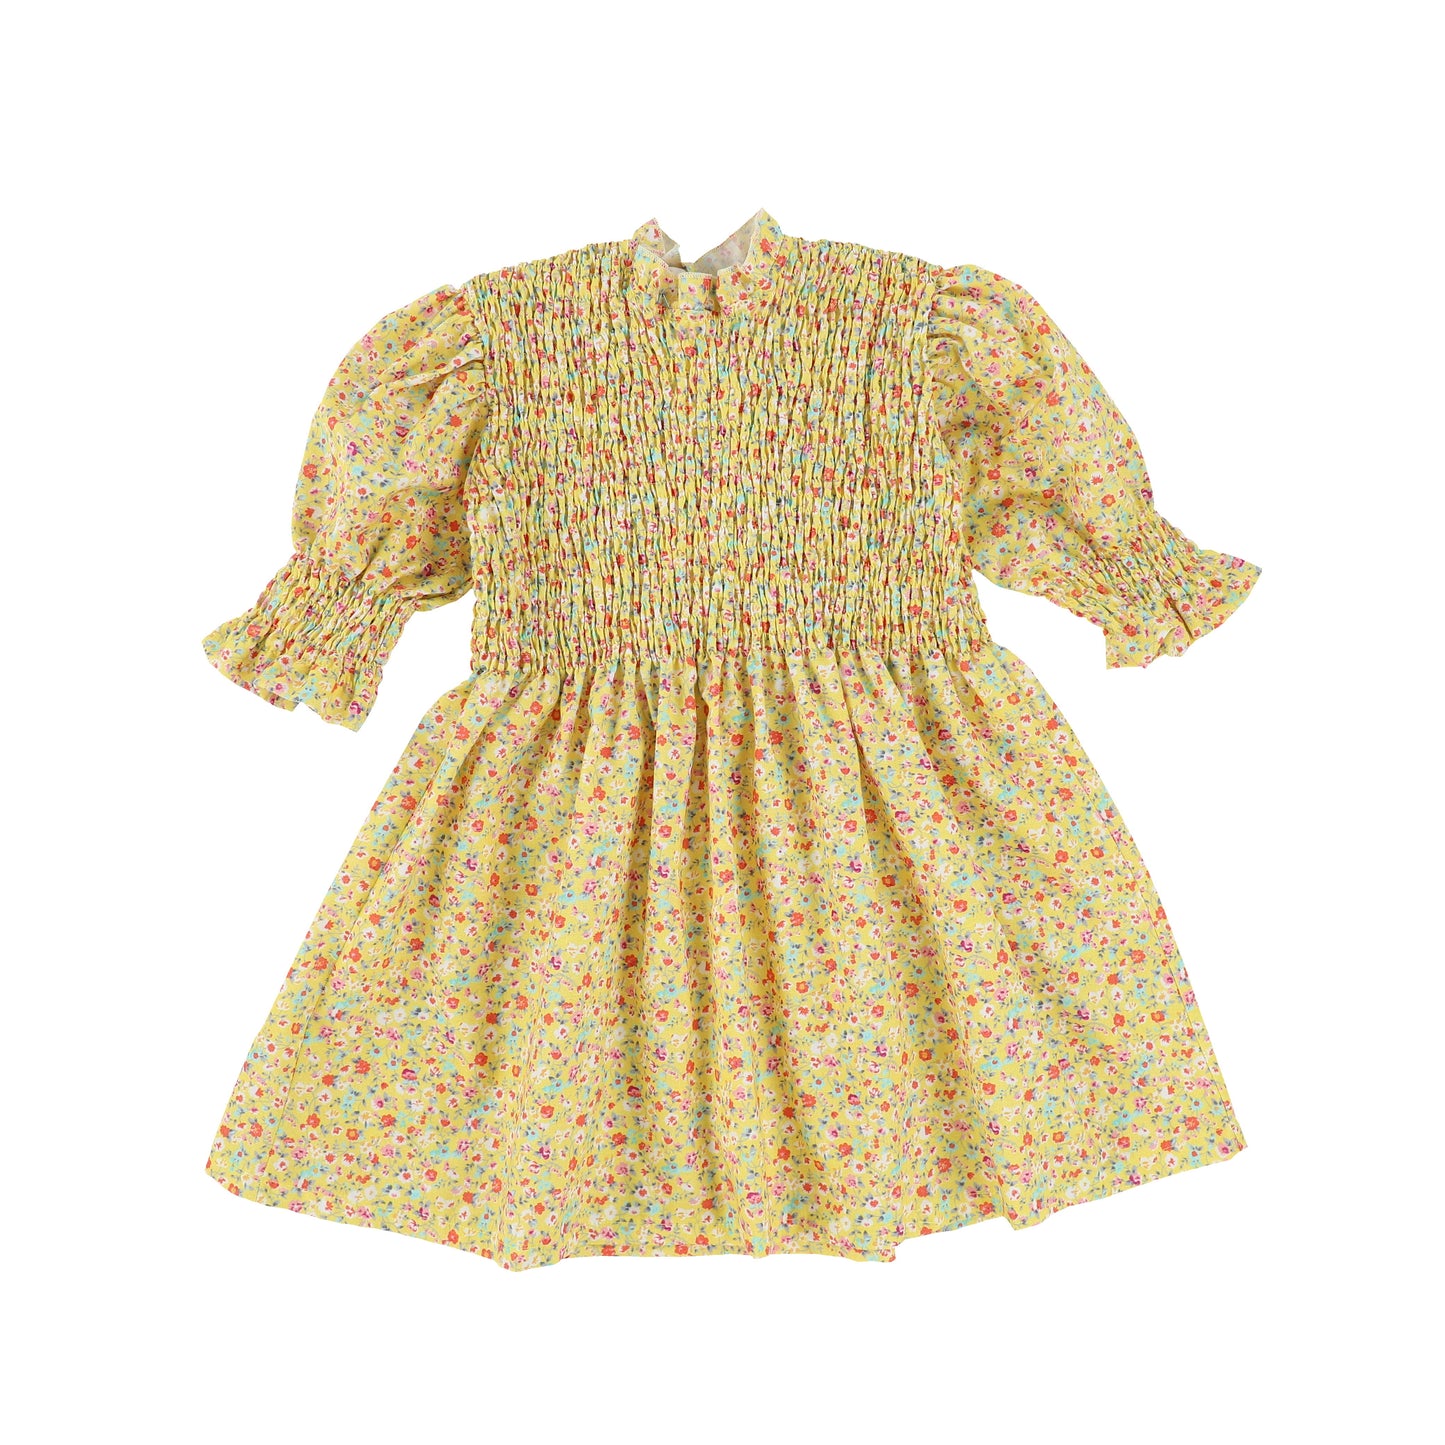 PERNILLE YELLOW FLORAL SMOCKED DRESS [Final Sale]